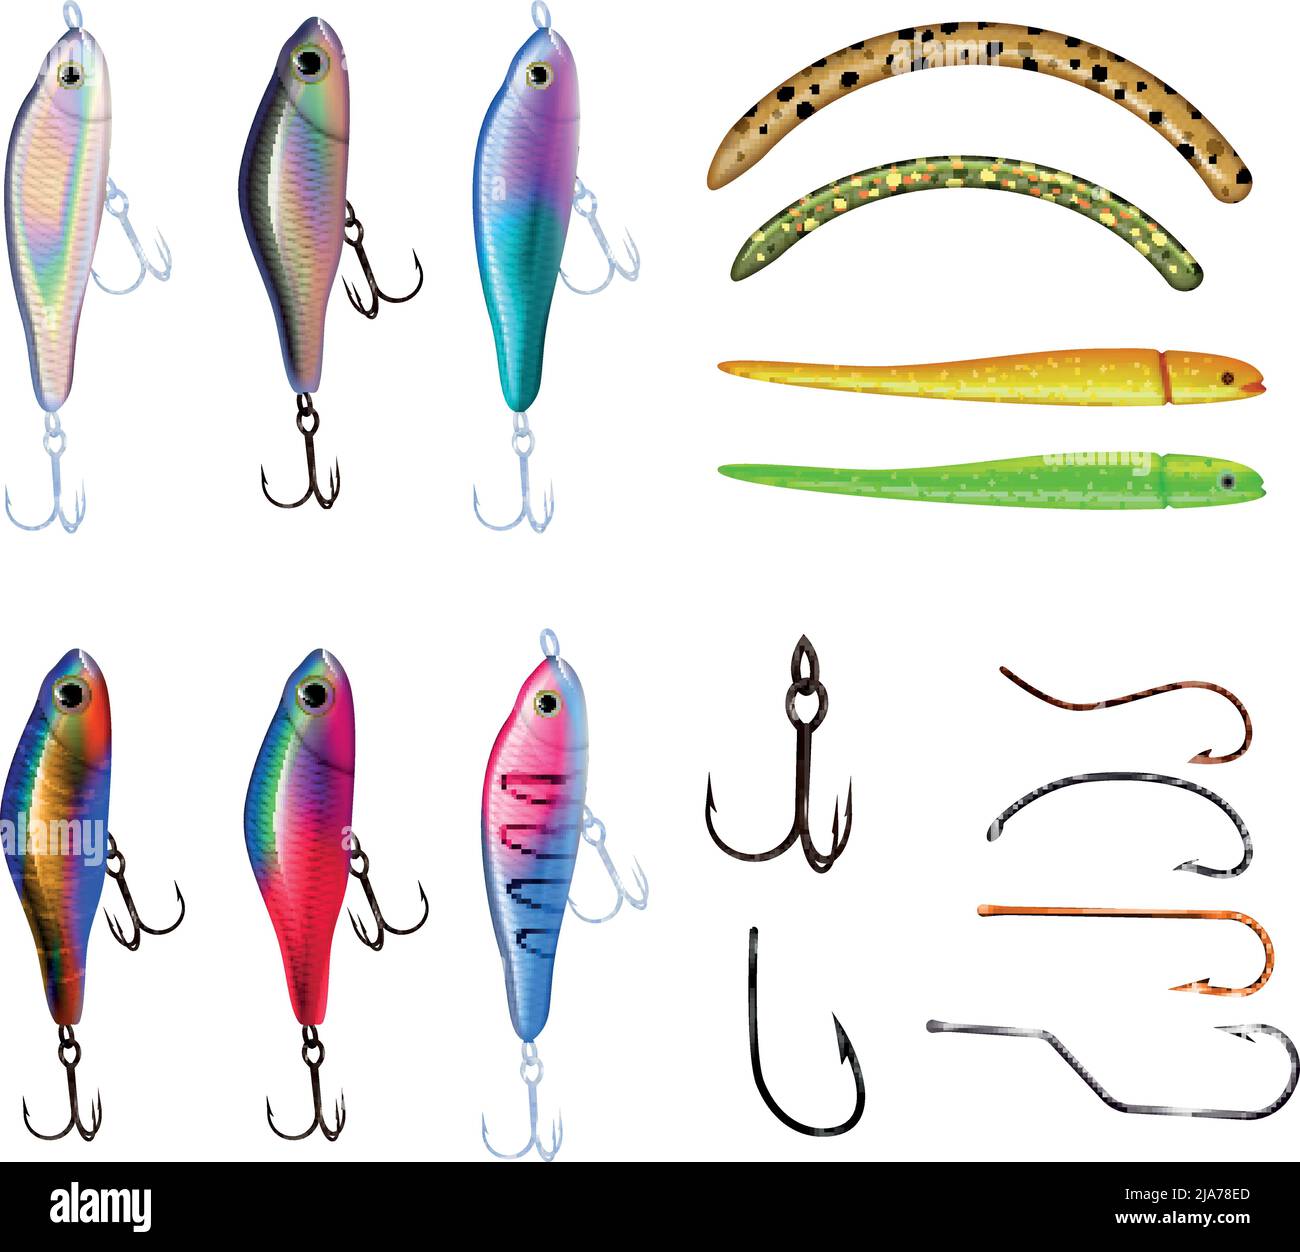 Rubber jigs Cut Out Stock Images & Pictures - Alamy